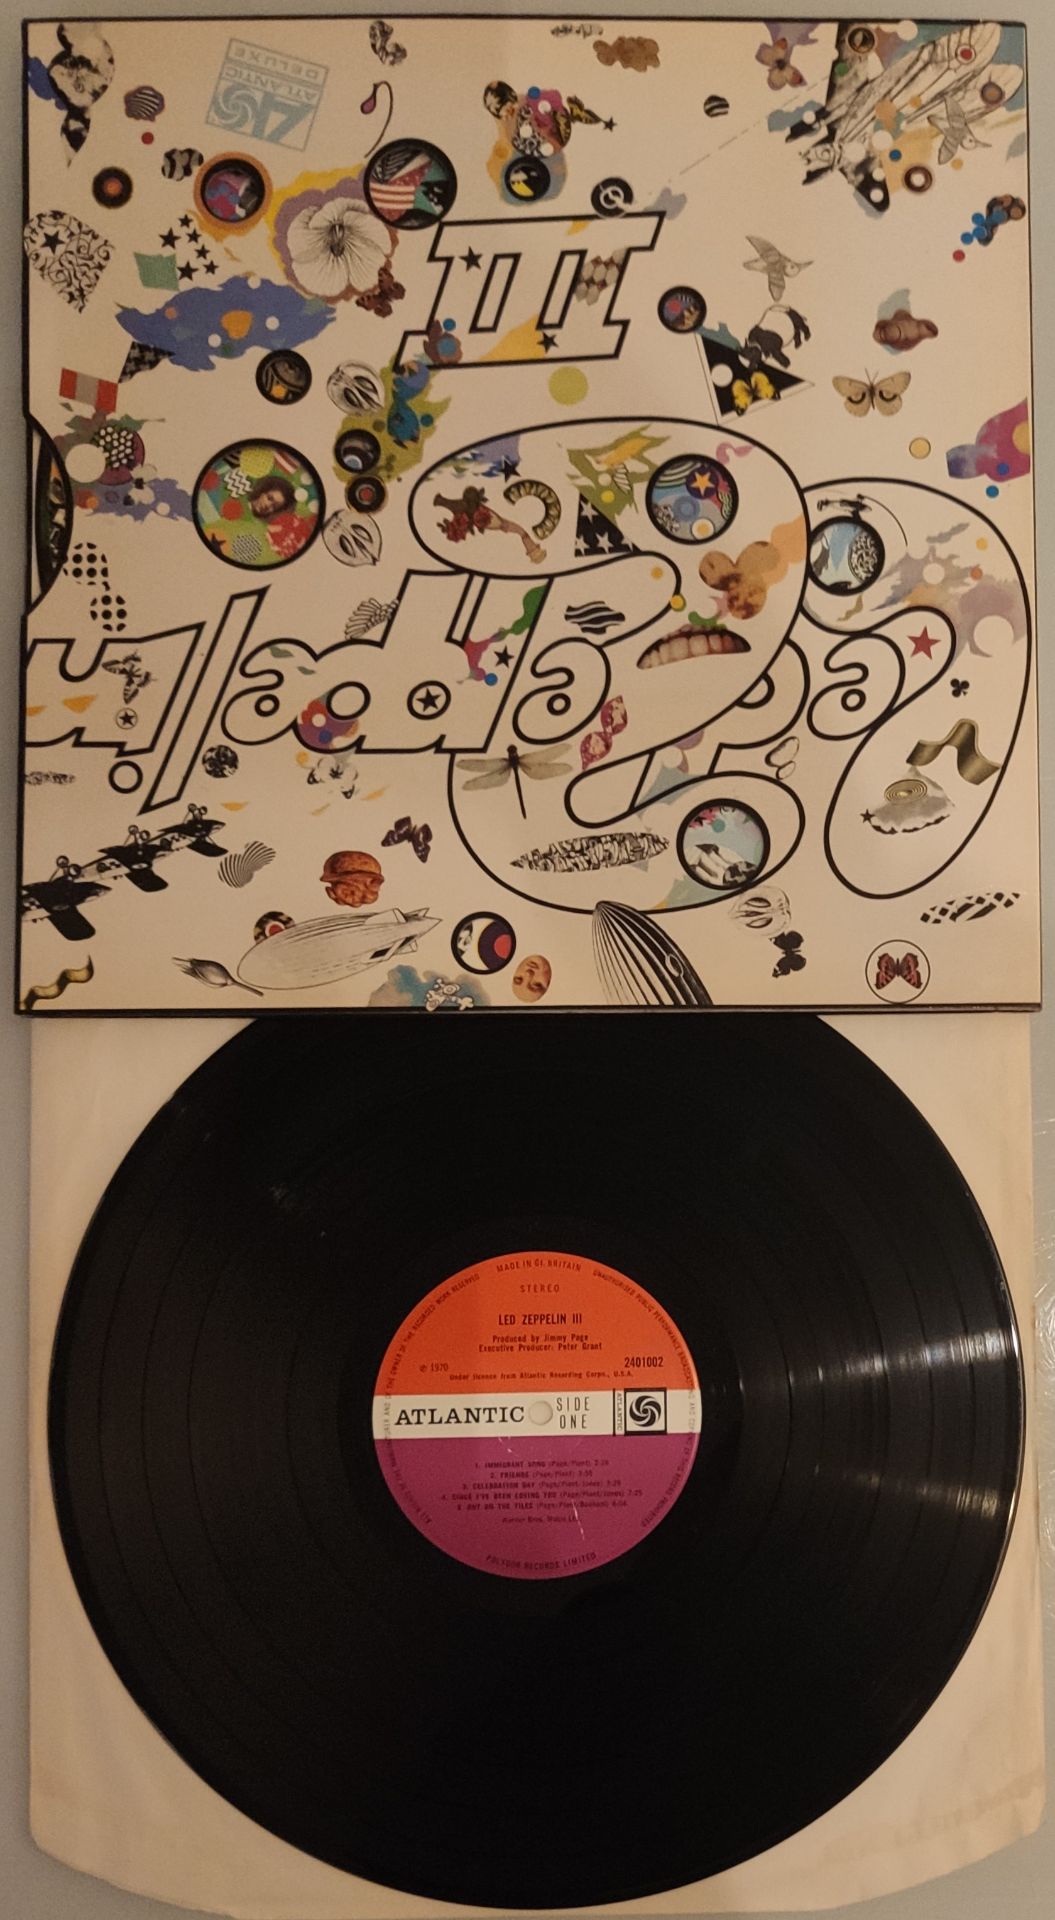 Led Zeppelin III UK 1970 1st Pressing - Peter Grant Credit - A5 / B5 - VG+ To EX.